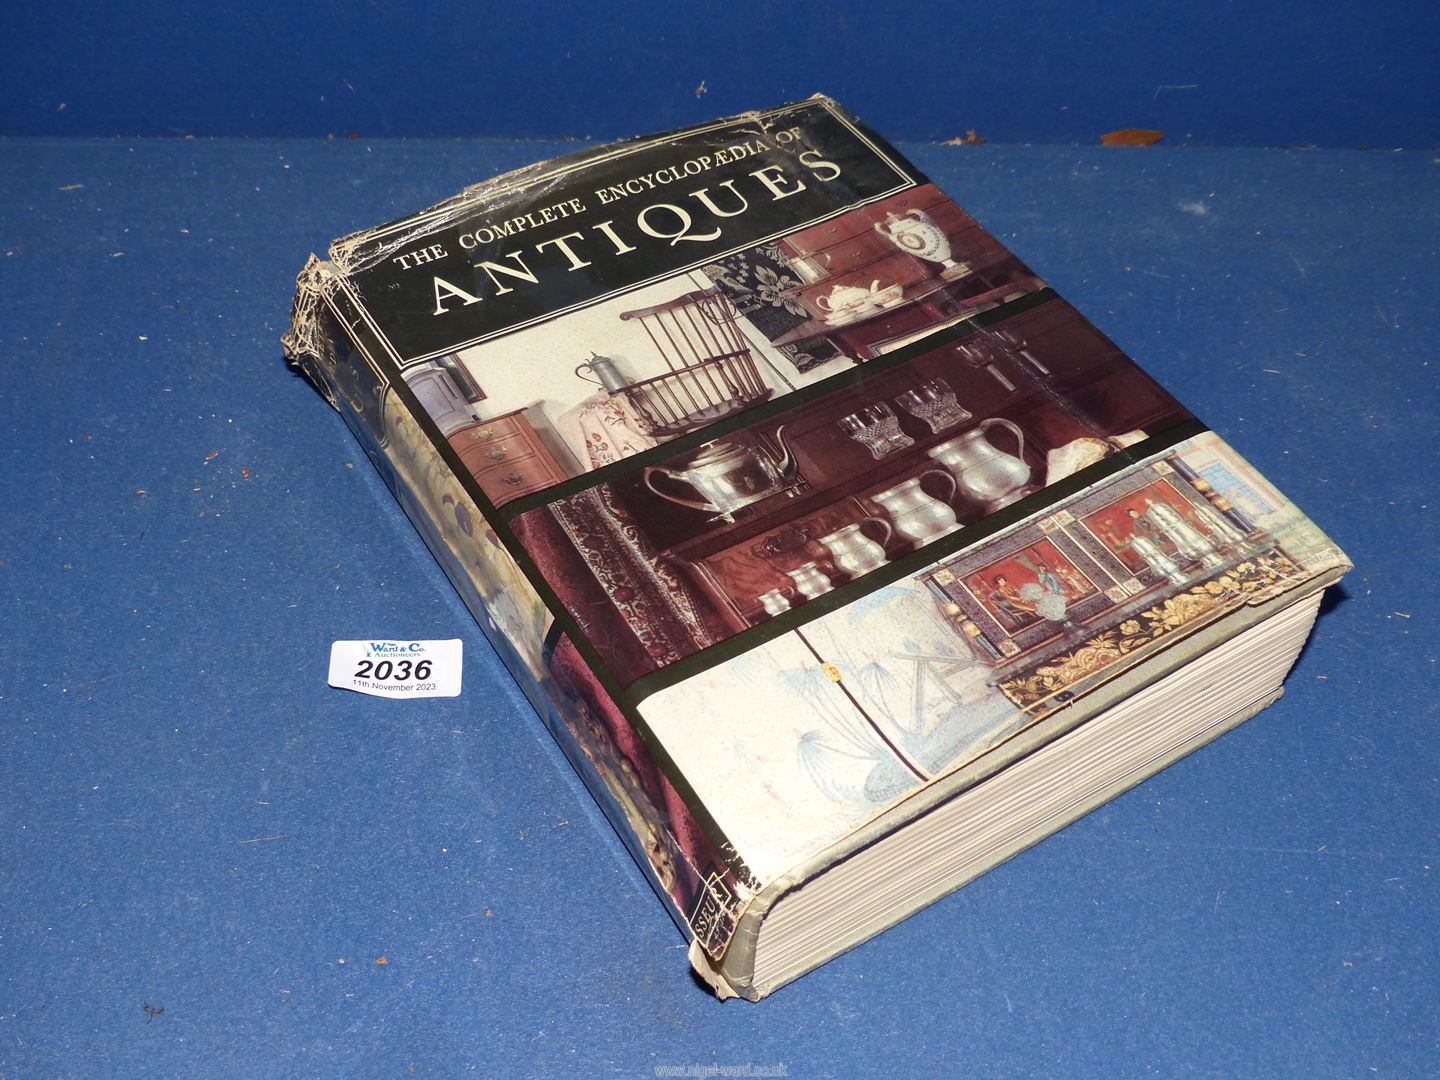 The Complete Encyclopedia of Antiques, compiled by The Connoisseur, edited by L.G.G. Ramsey 1968.